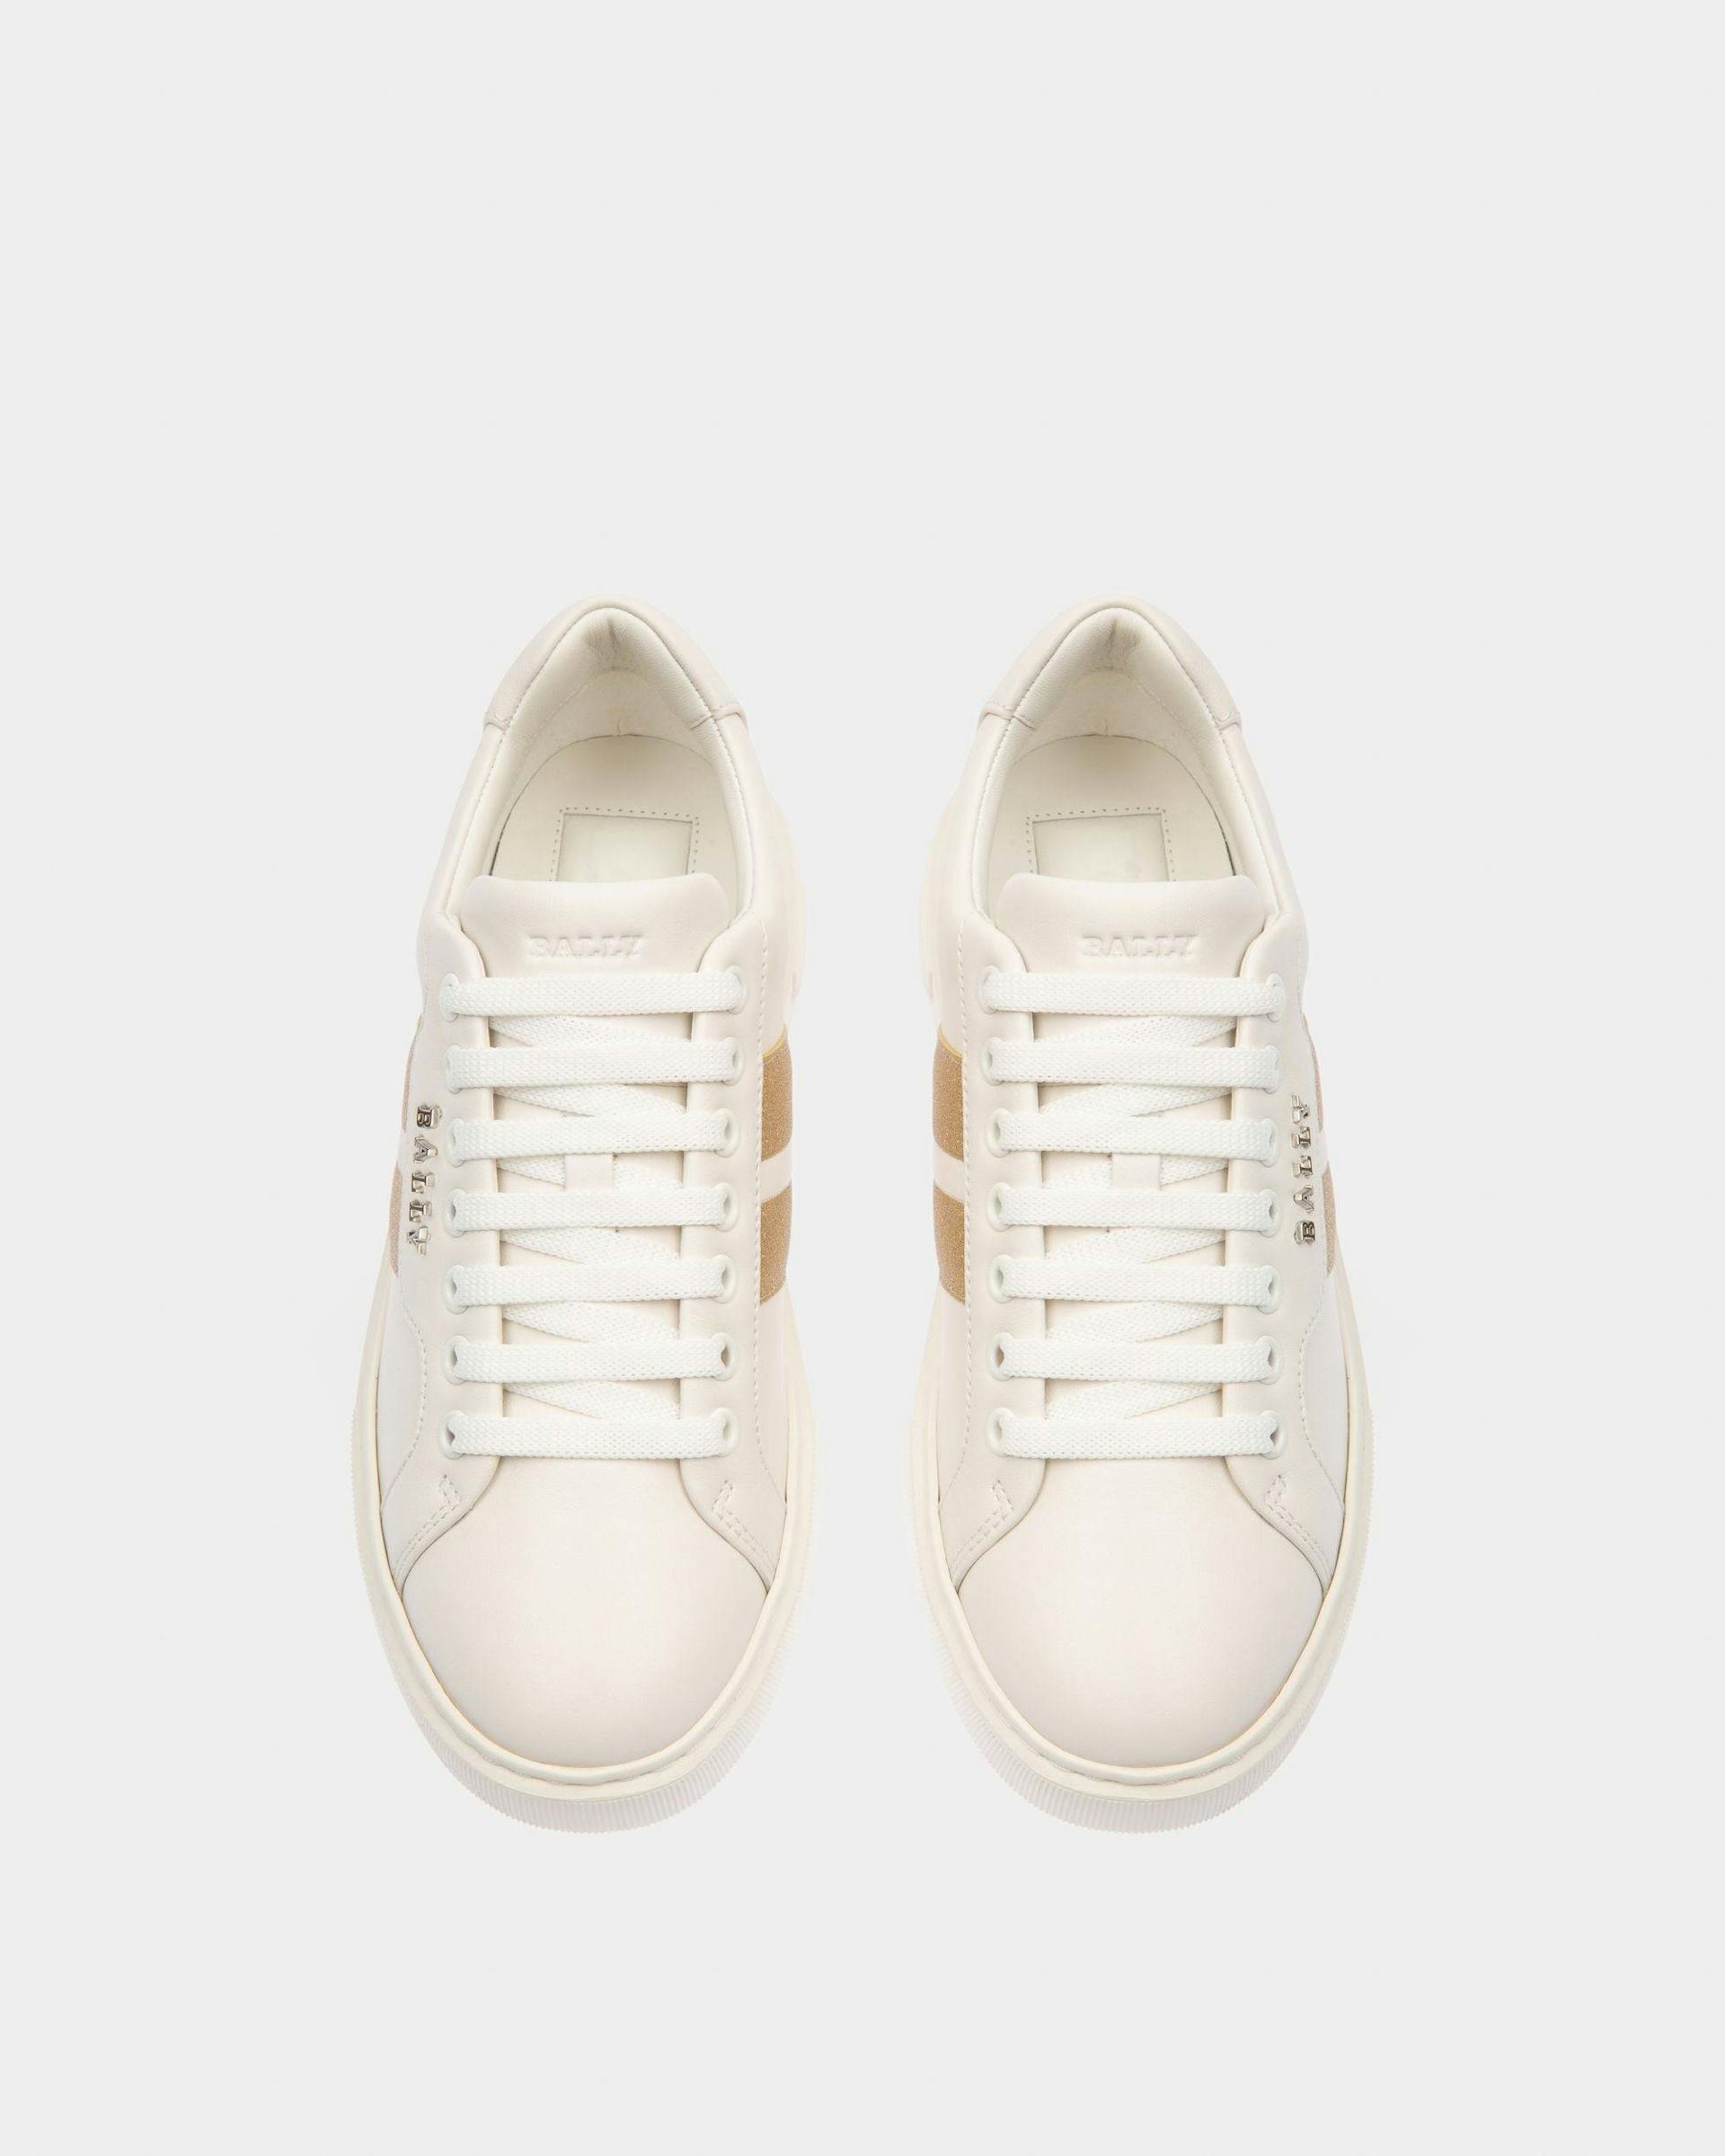 Melany Sneakers In White And Yellow Gold Leather - Women's - Bally - 02